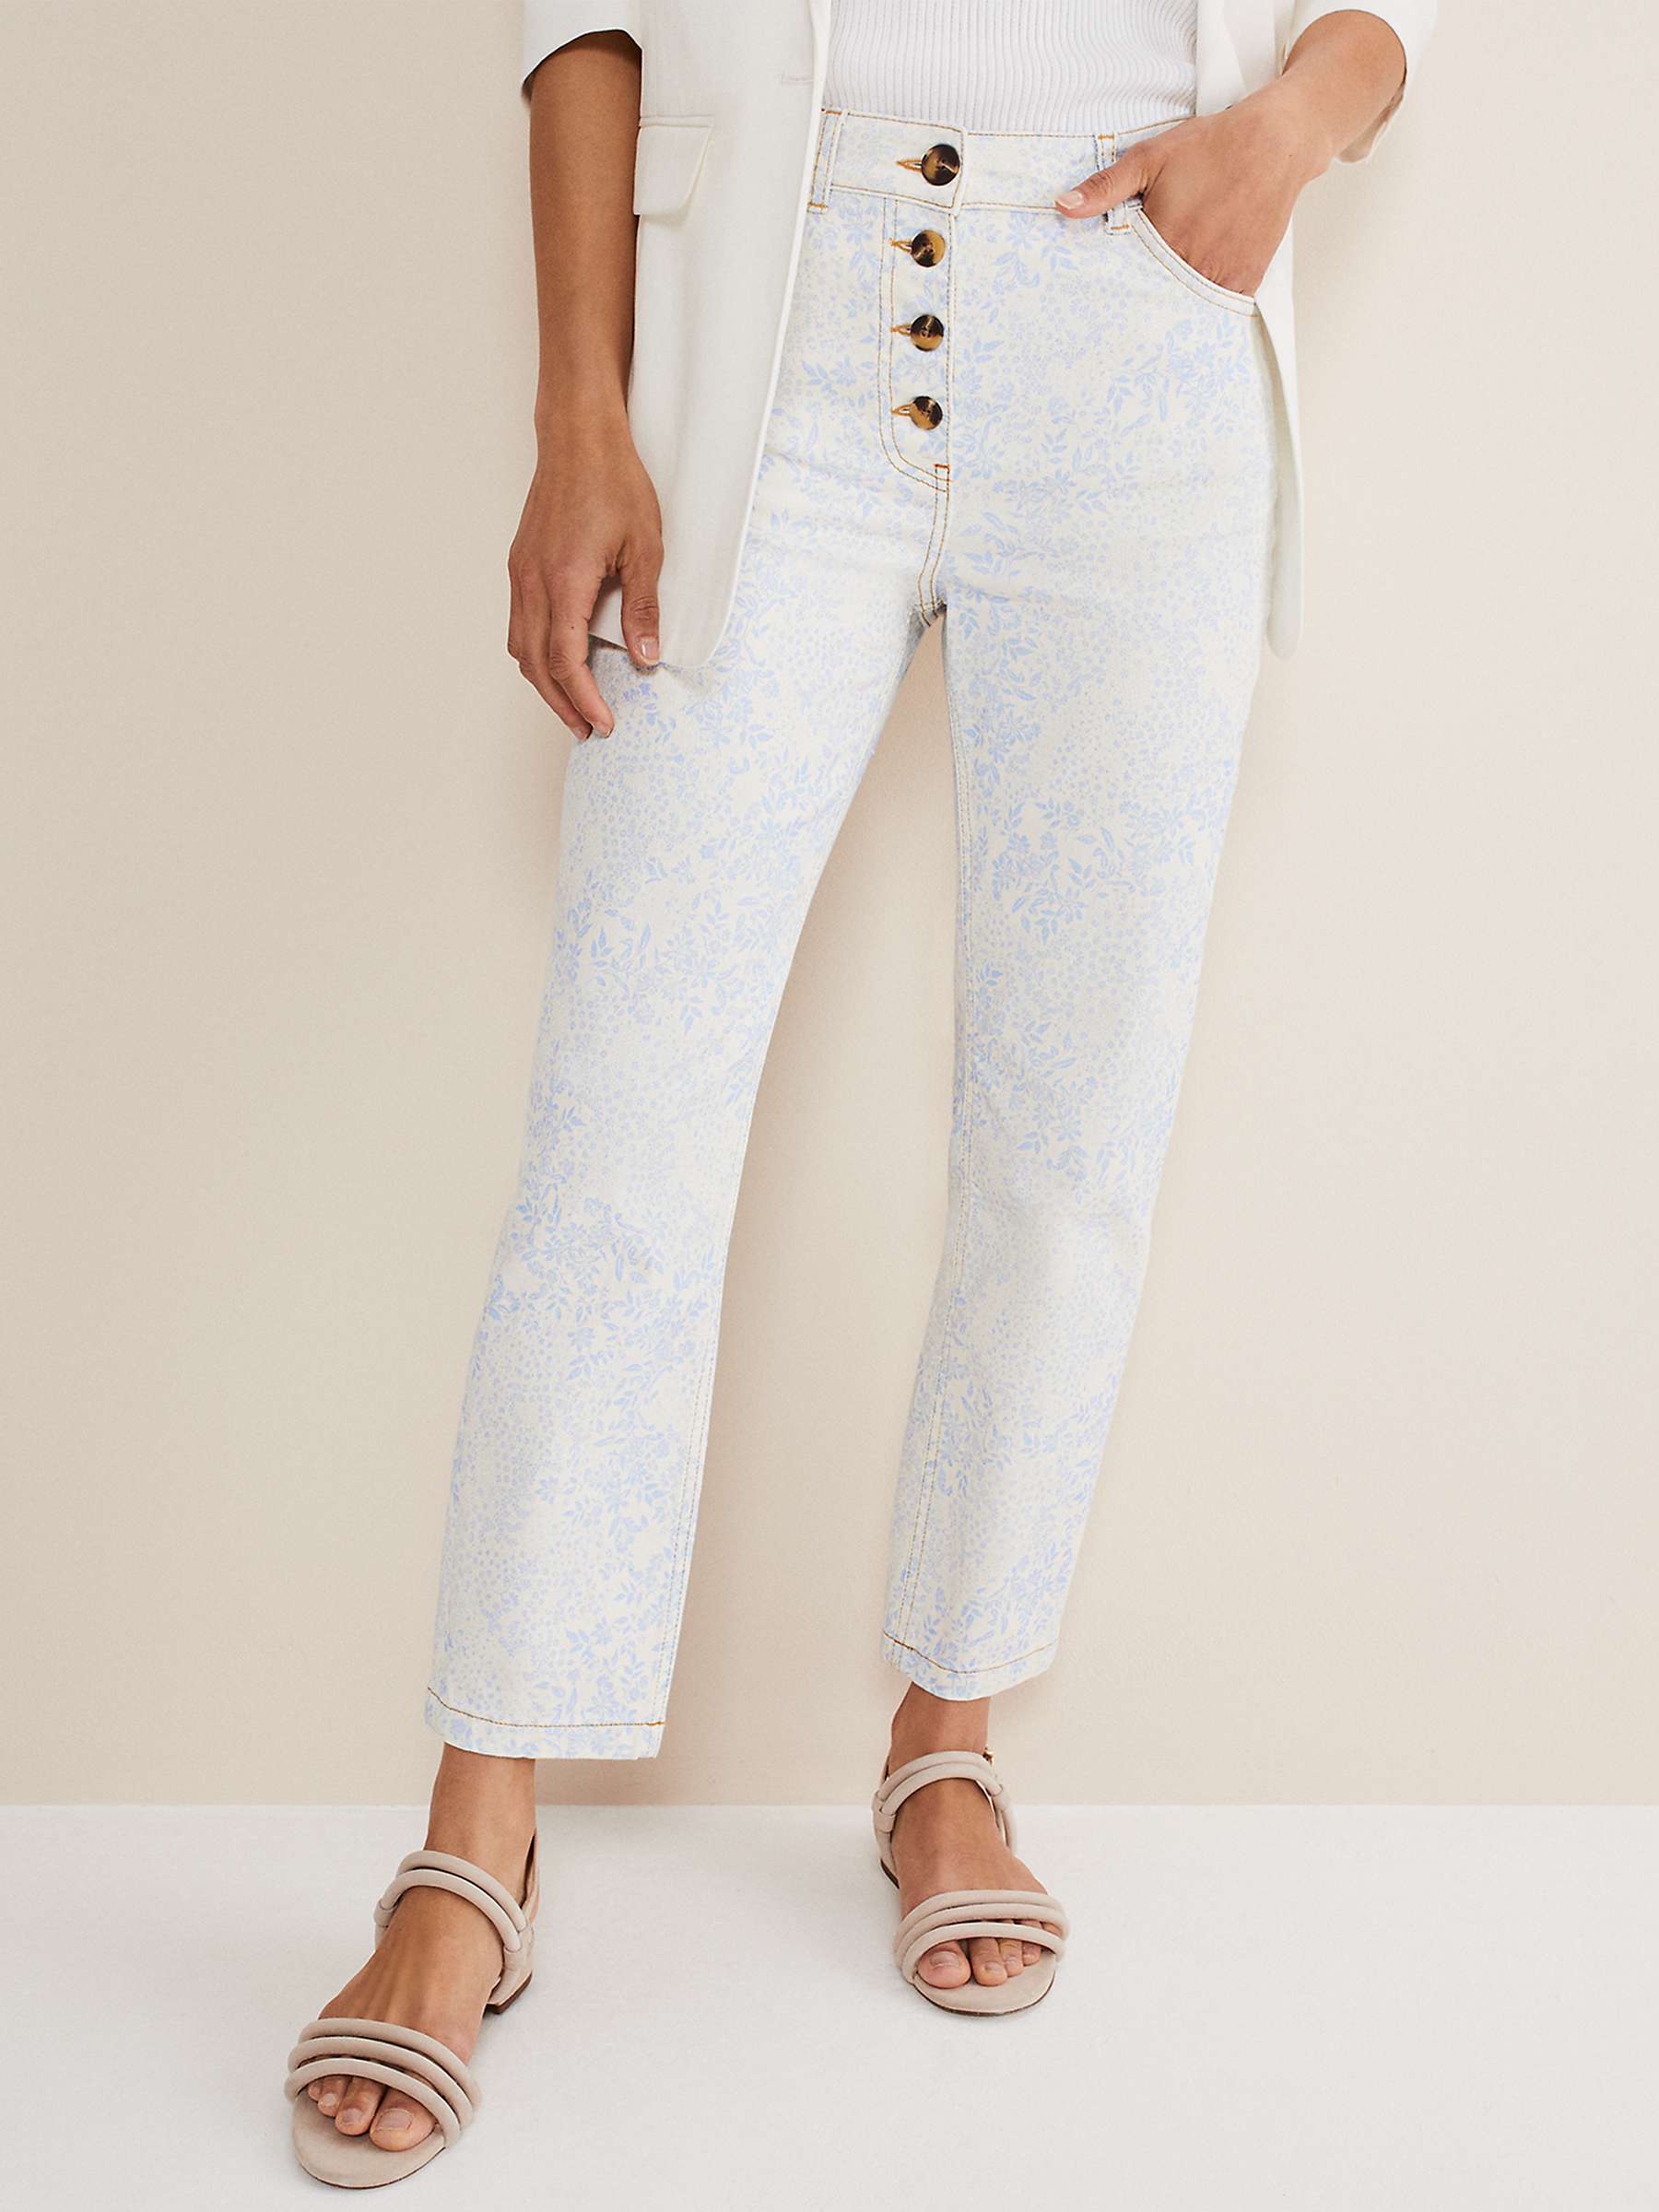 Buy Phase Eight Cordelia Floral Print Jeans, Ivory/Blue Online at johnlewis.com